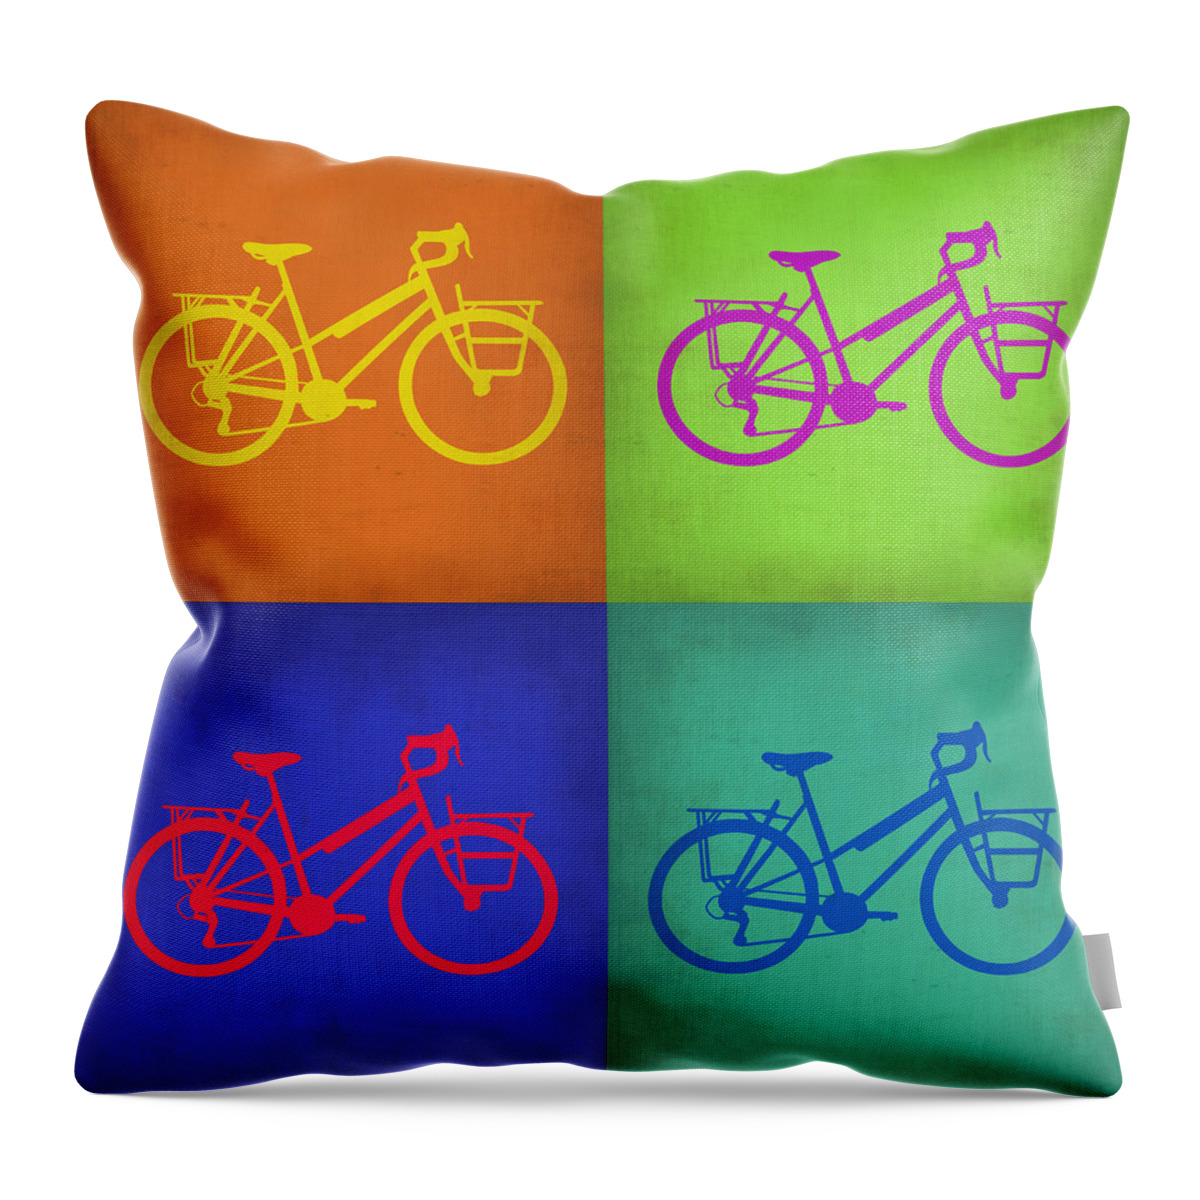  Throw Pillow featuring the painting Vintage Bicycle Pop Art 1 by Naxart Studio